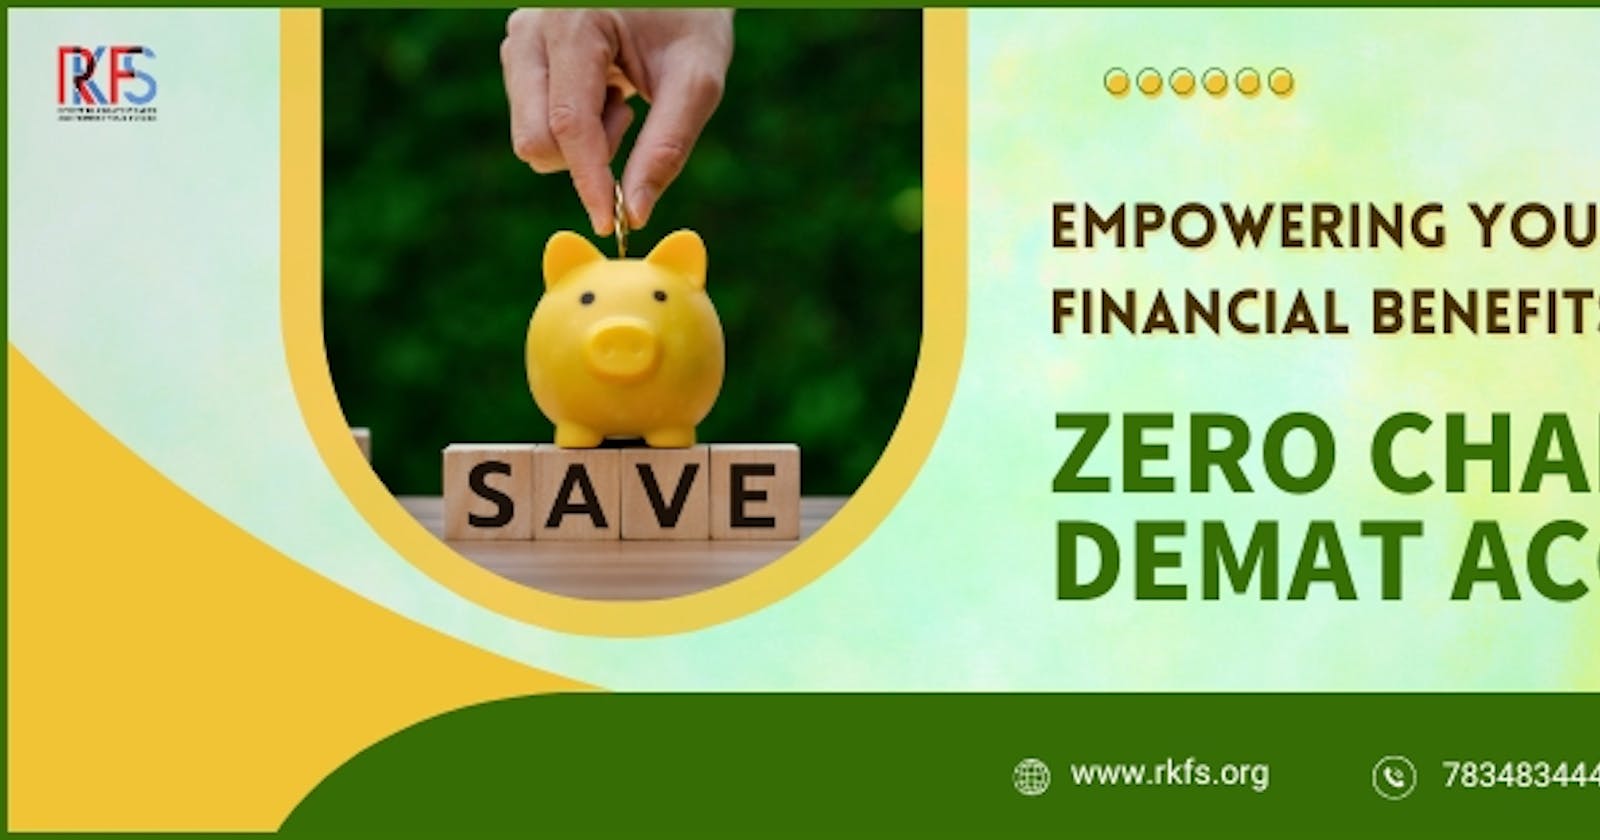 Empowering Your Financial Benefits With Zero Charges Demat Account